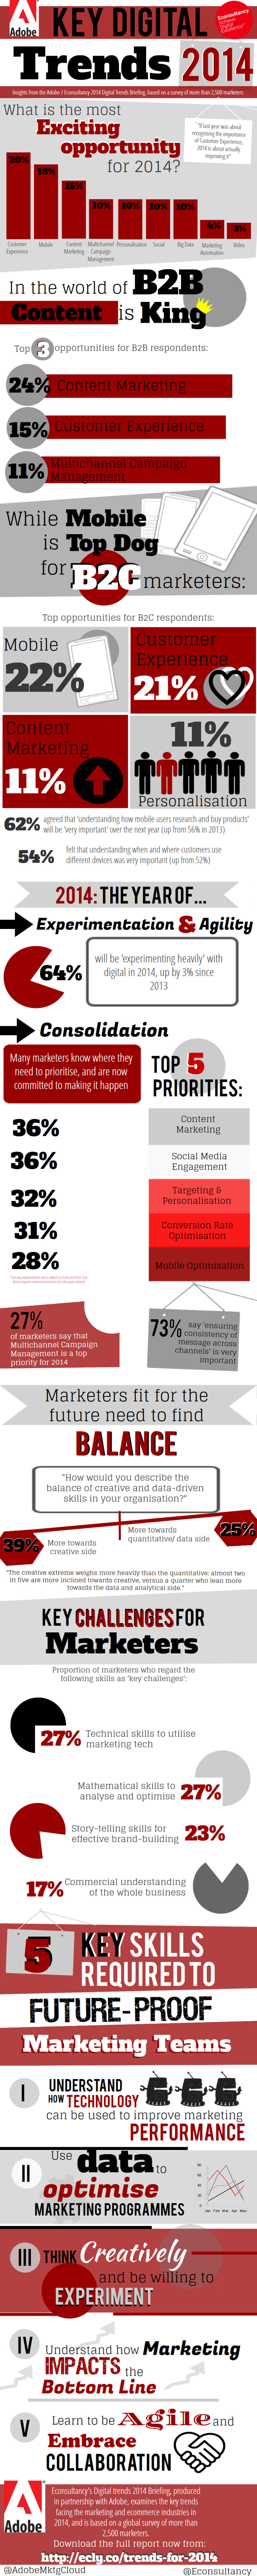 Customer experience is the most exciting opportunity for marketers [infographic] - Econsultancy | #TheMarketingTechAlert | The MarTech Digest | Scoop.it